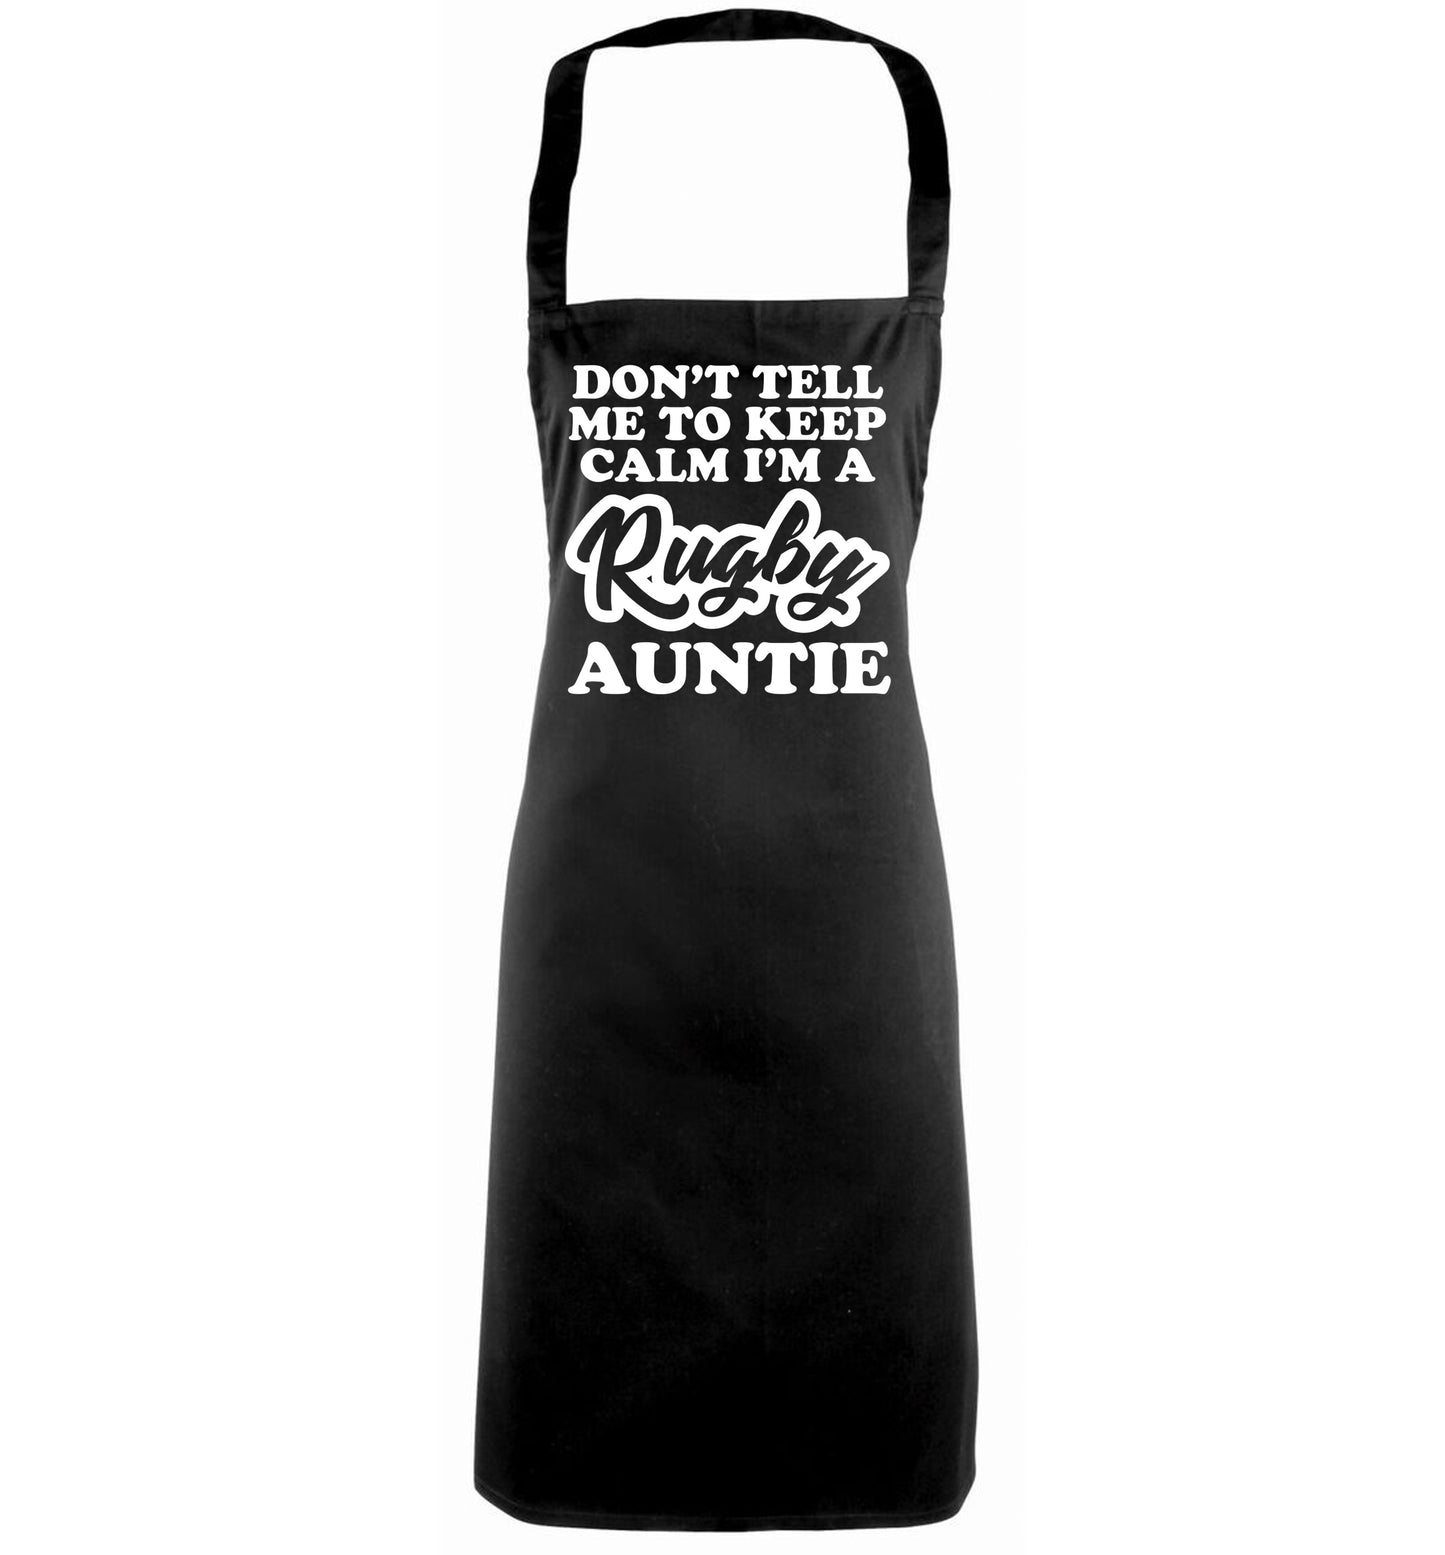 Don't tell me keep calm I'm a rugby auntie black apron